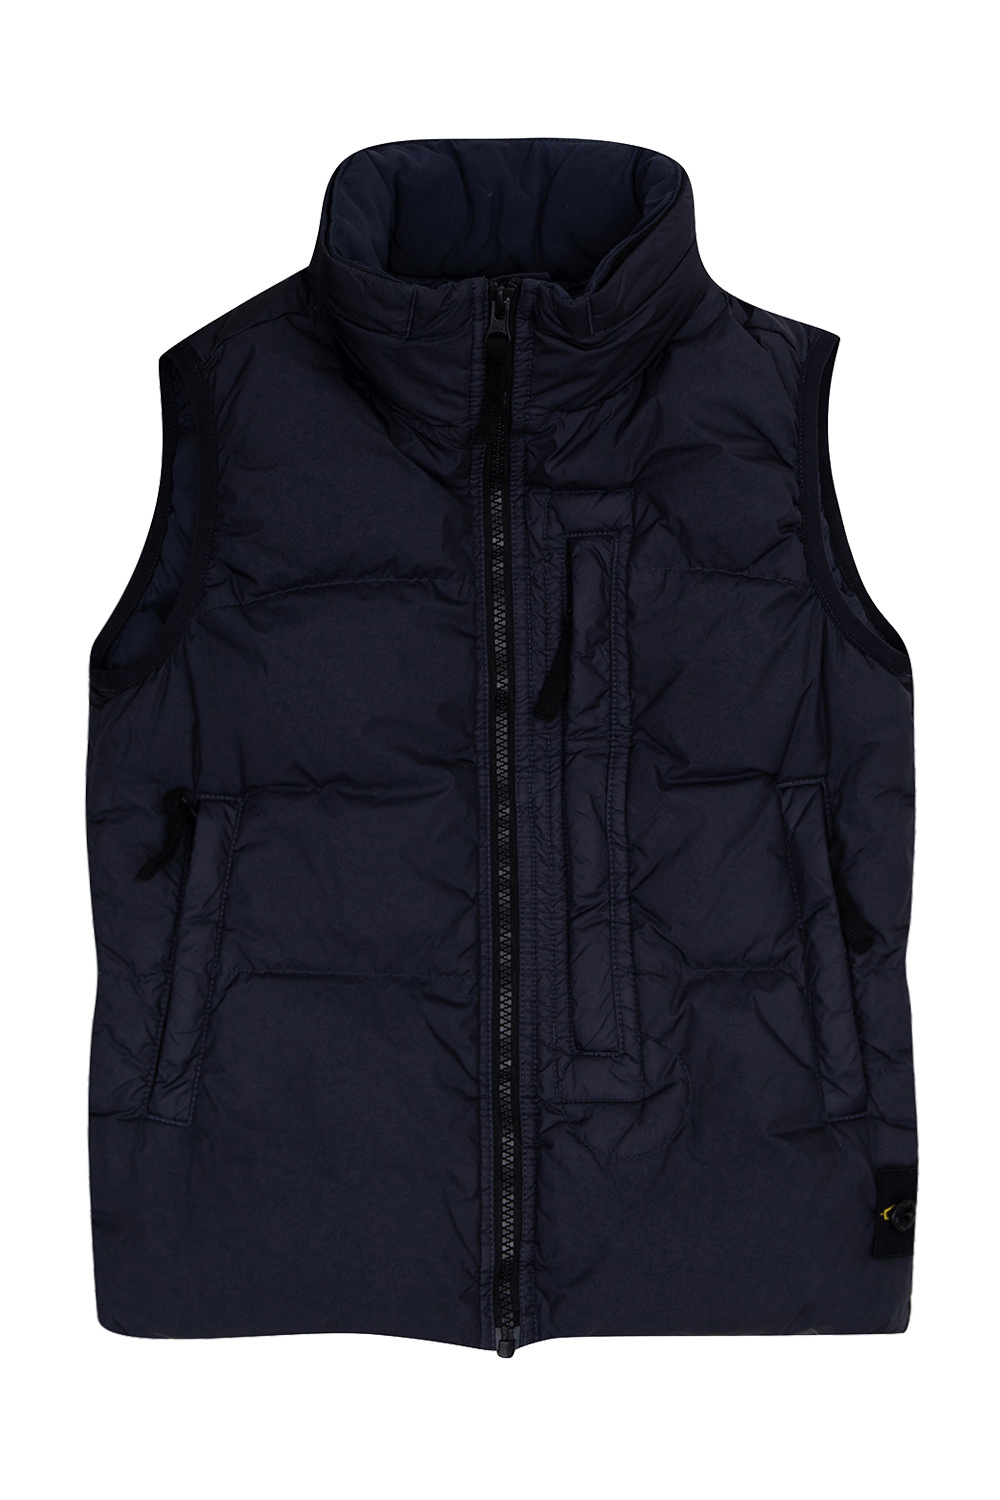 Stone Island Kids Check out our suggestions for the perfect Valentines Day gift for him